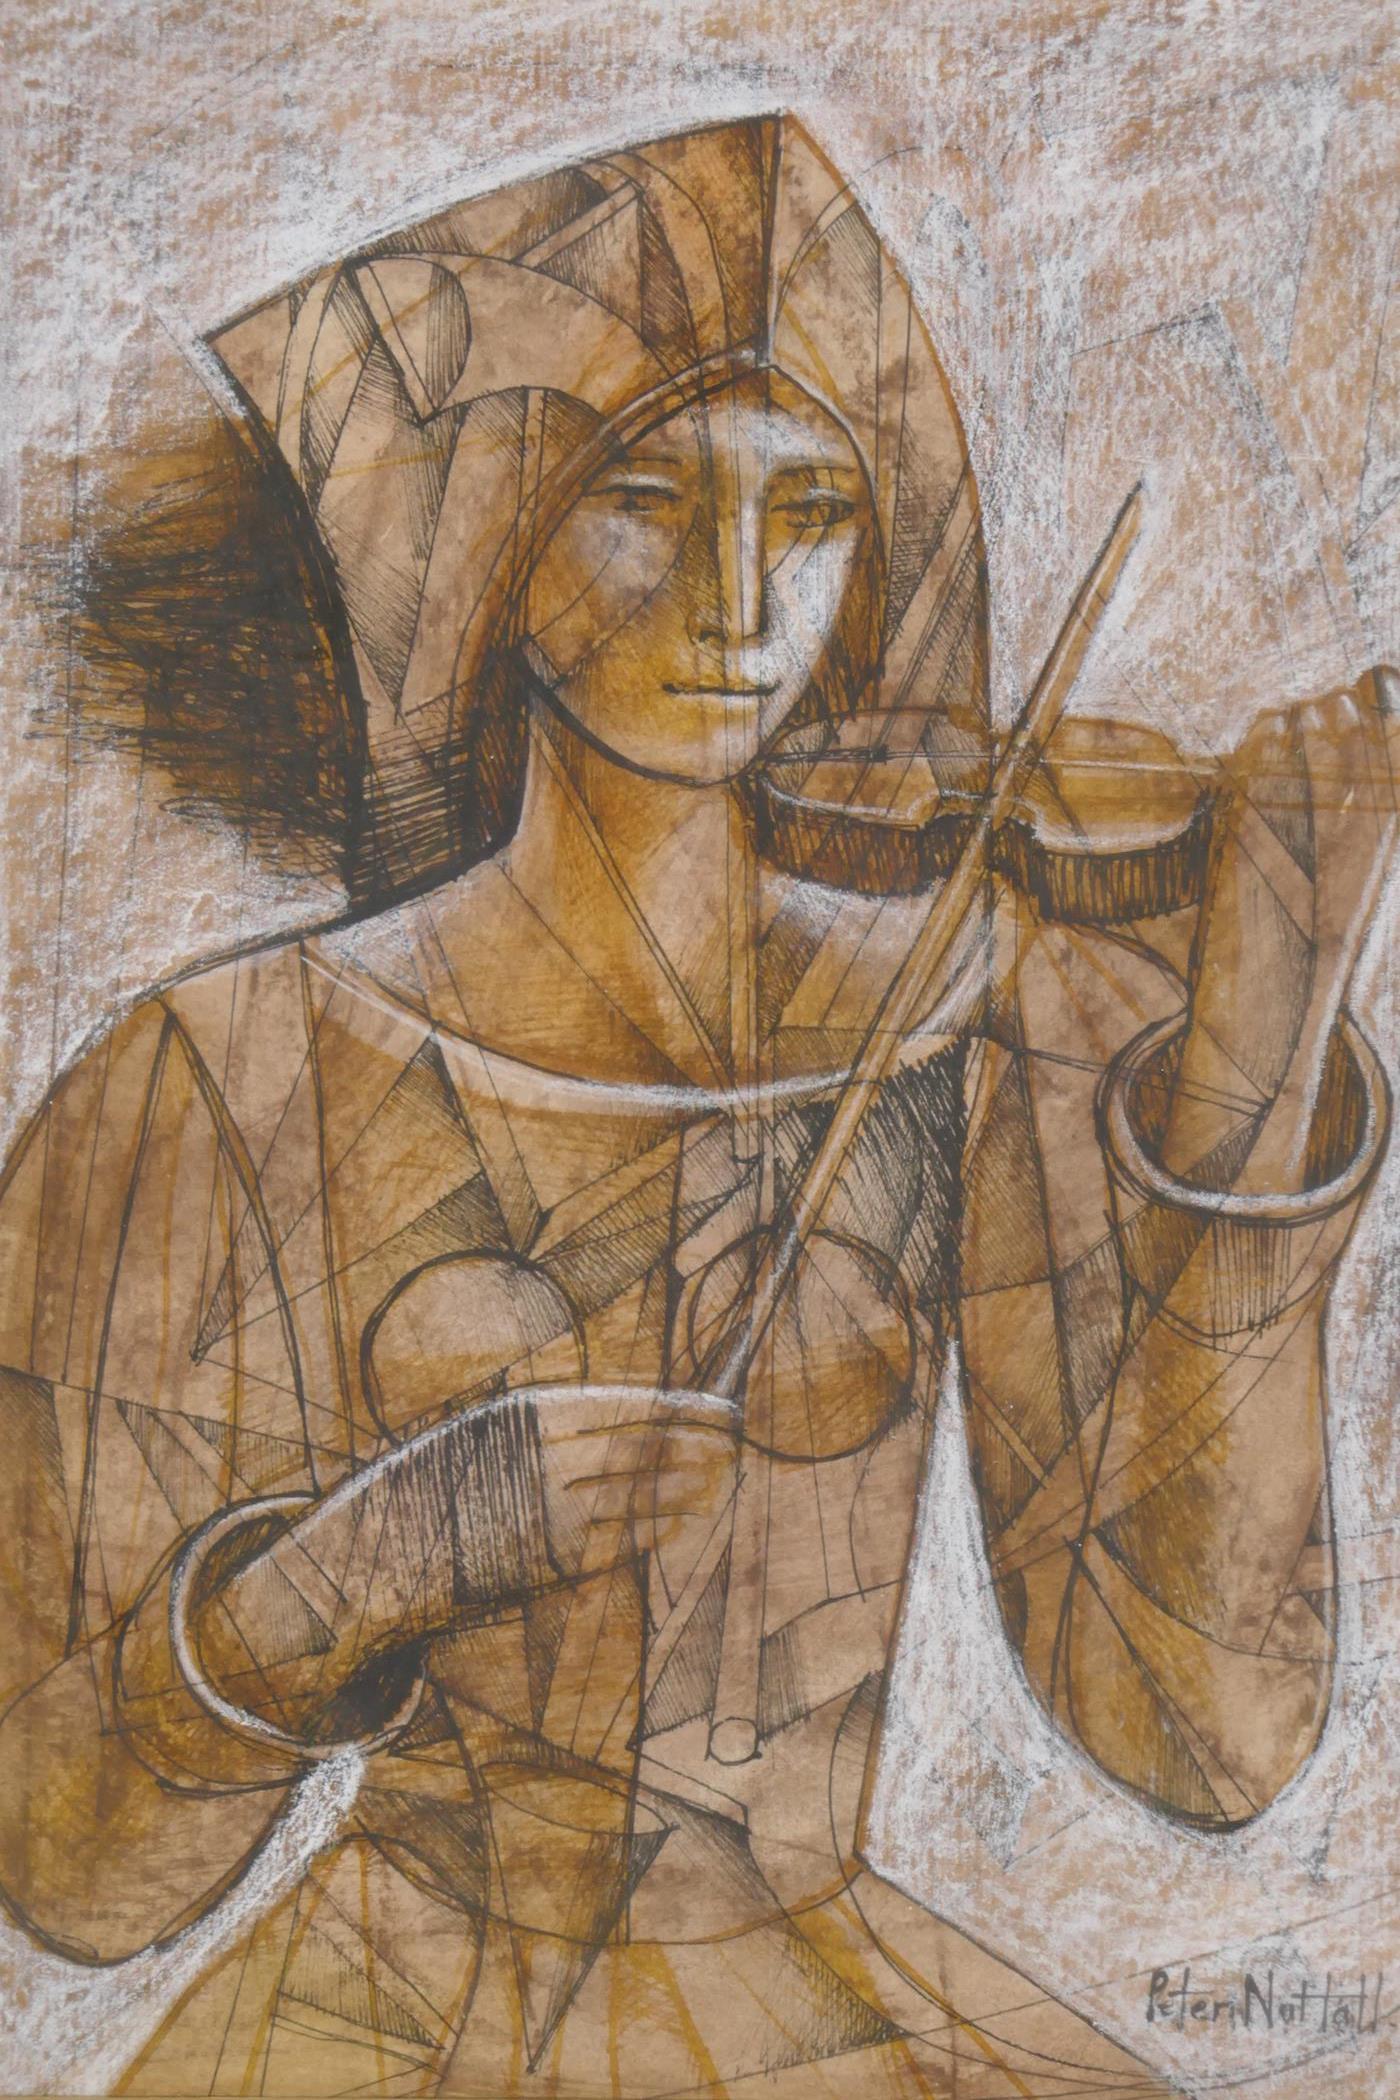 Peter Nuttall, woman playing a violin, signeda nd dated '74, pen, wash and crayon, 22 x 30cm